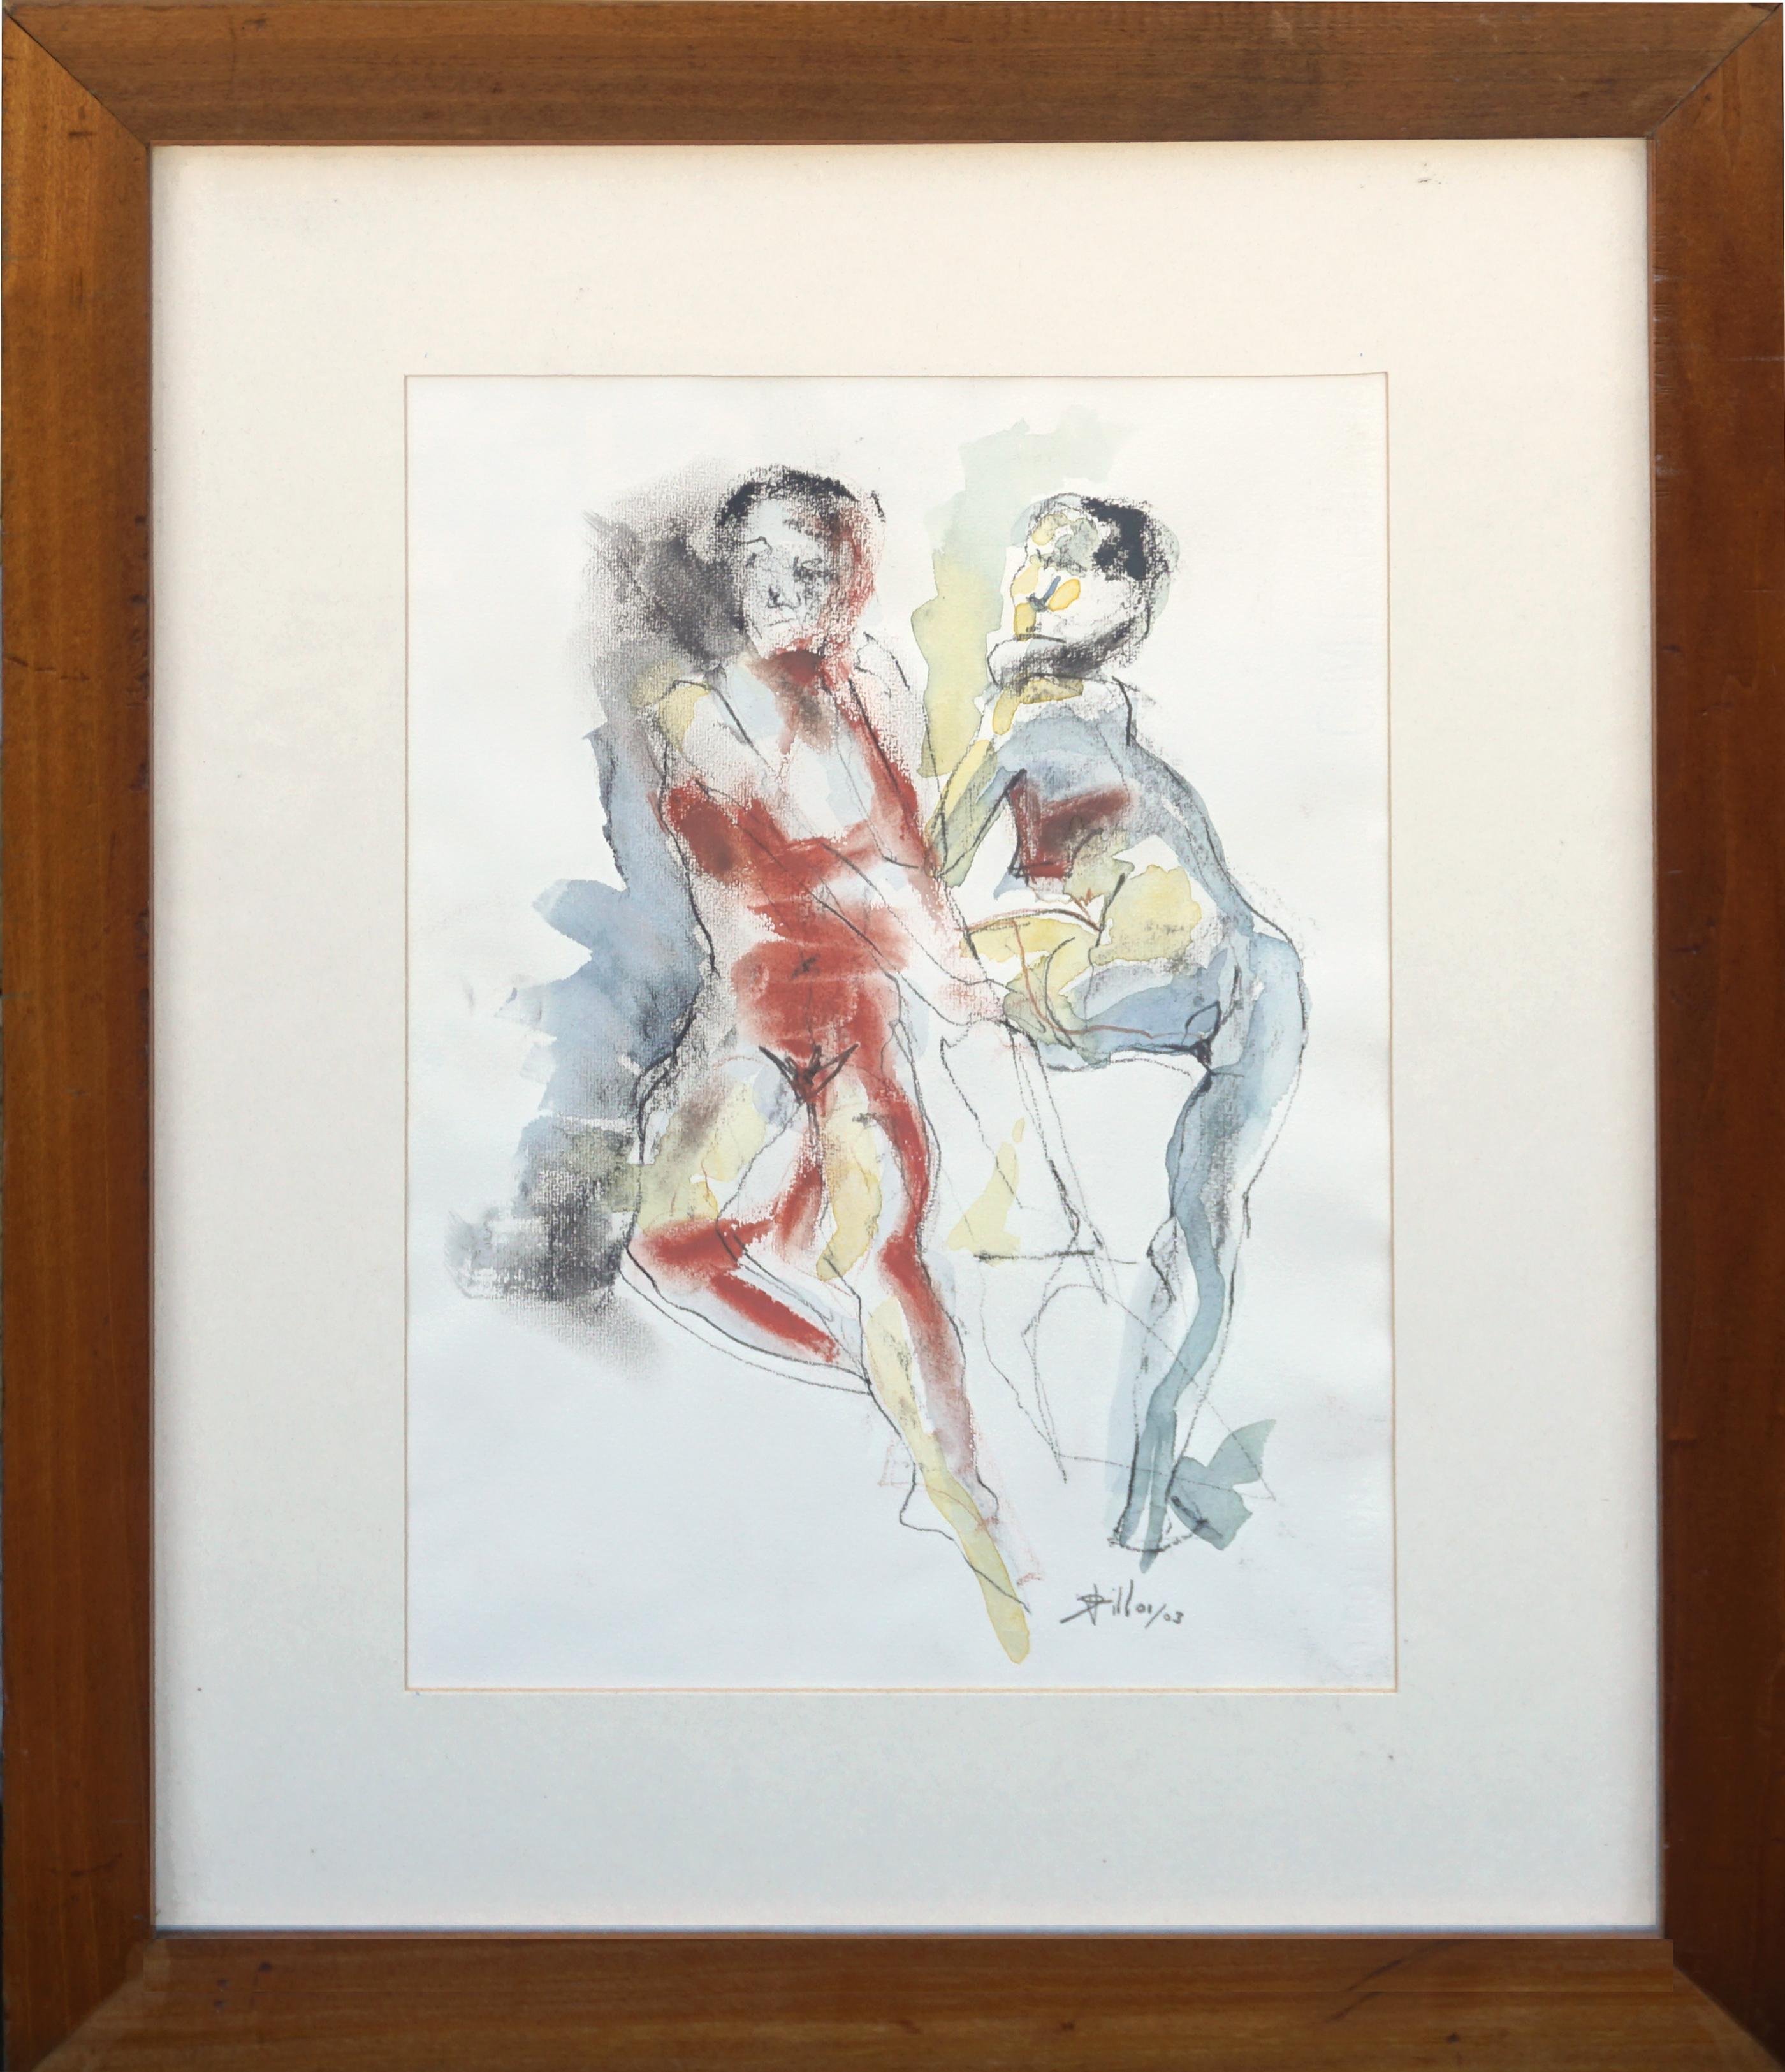 Two Nude Figures - Modernist Abstract Figure Study in Red & Blue 